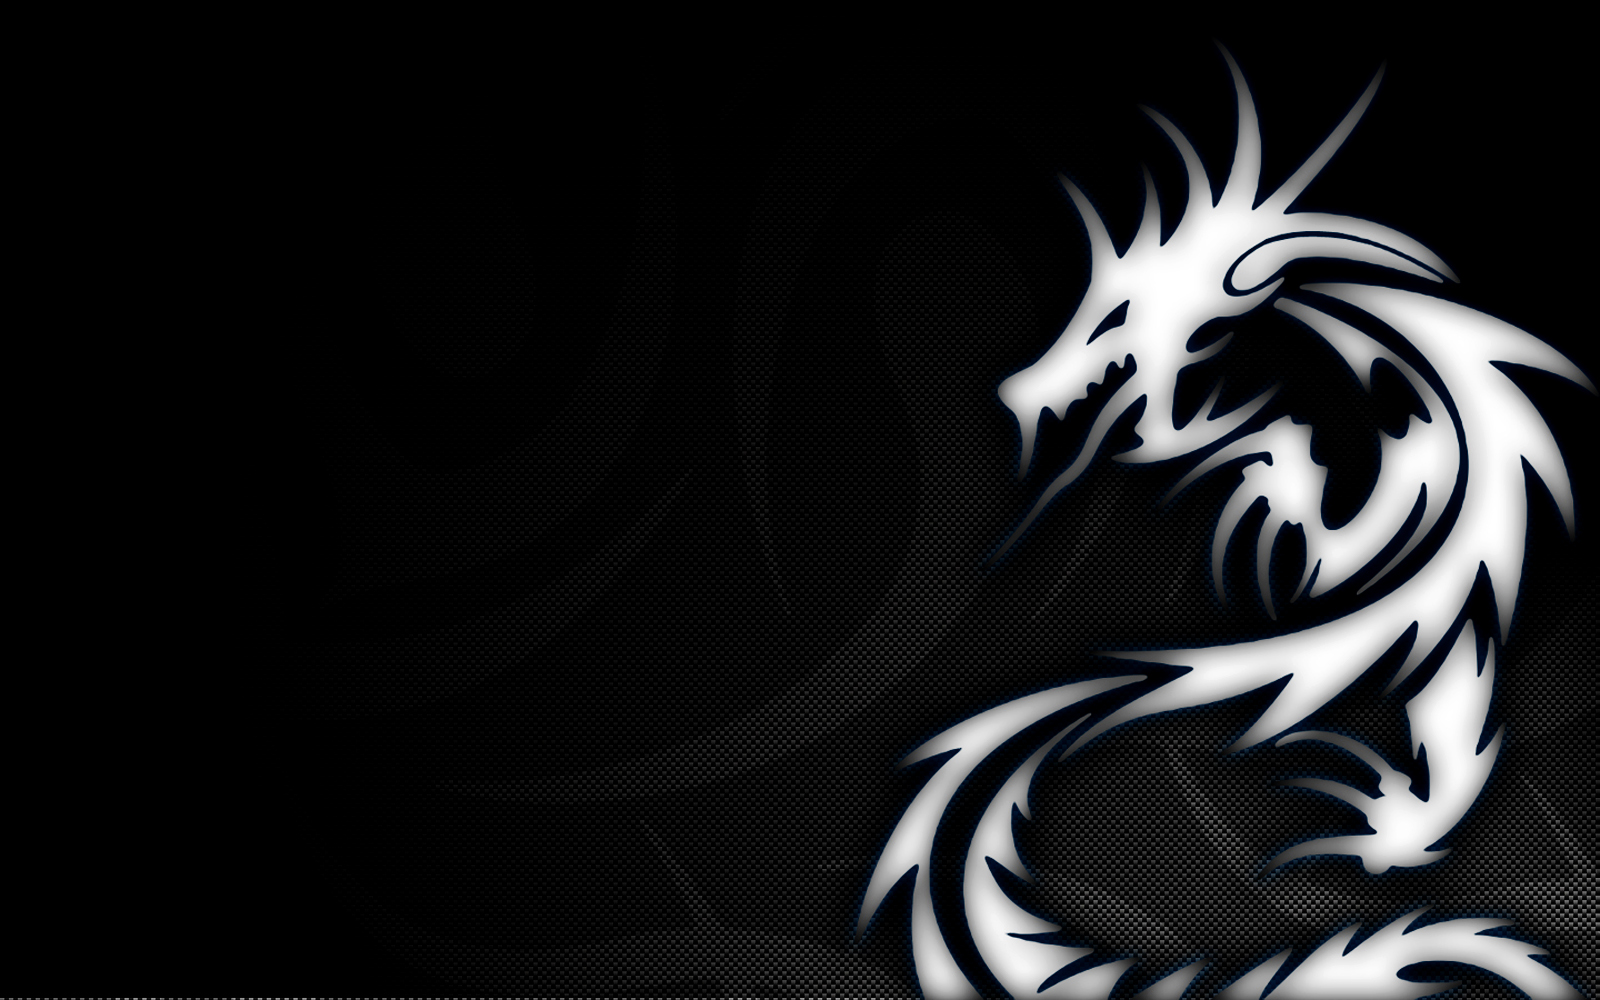 Dragon Logo Designs HD Wallpapers Download Free Wallpapers in HD